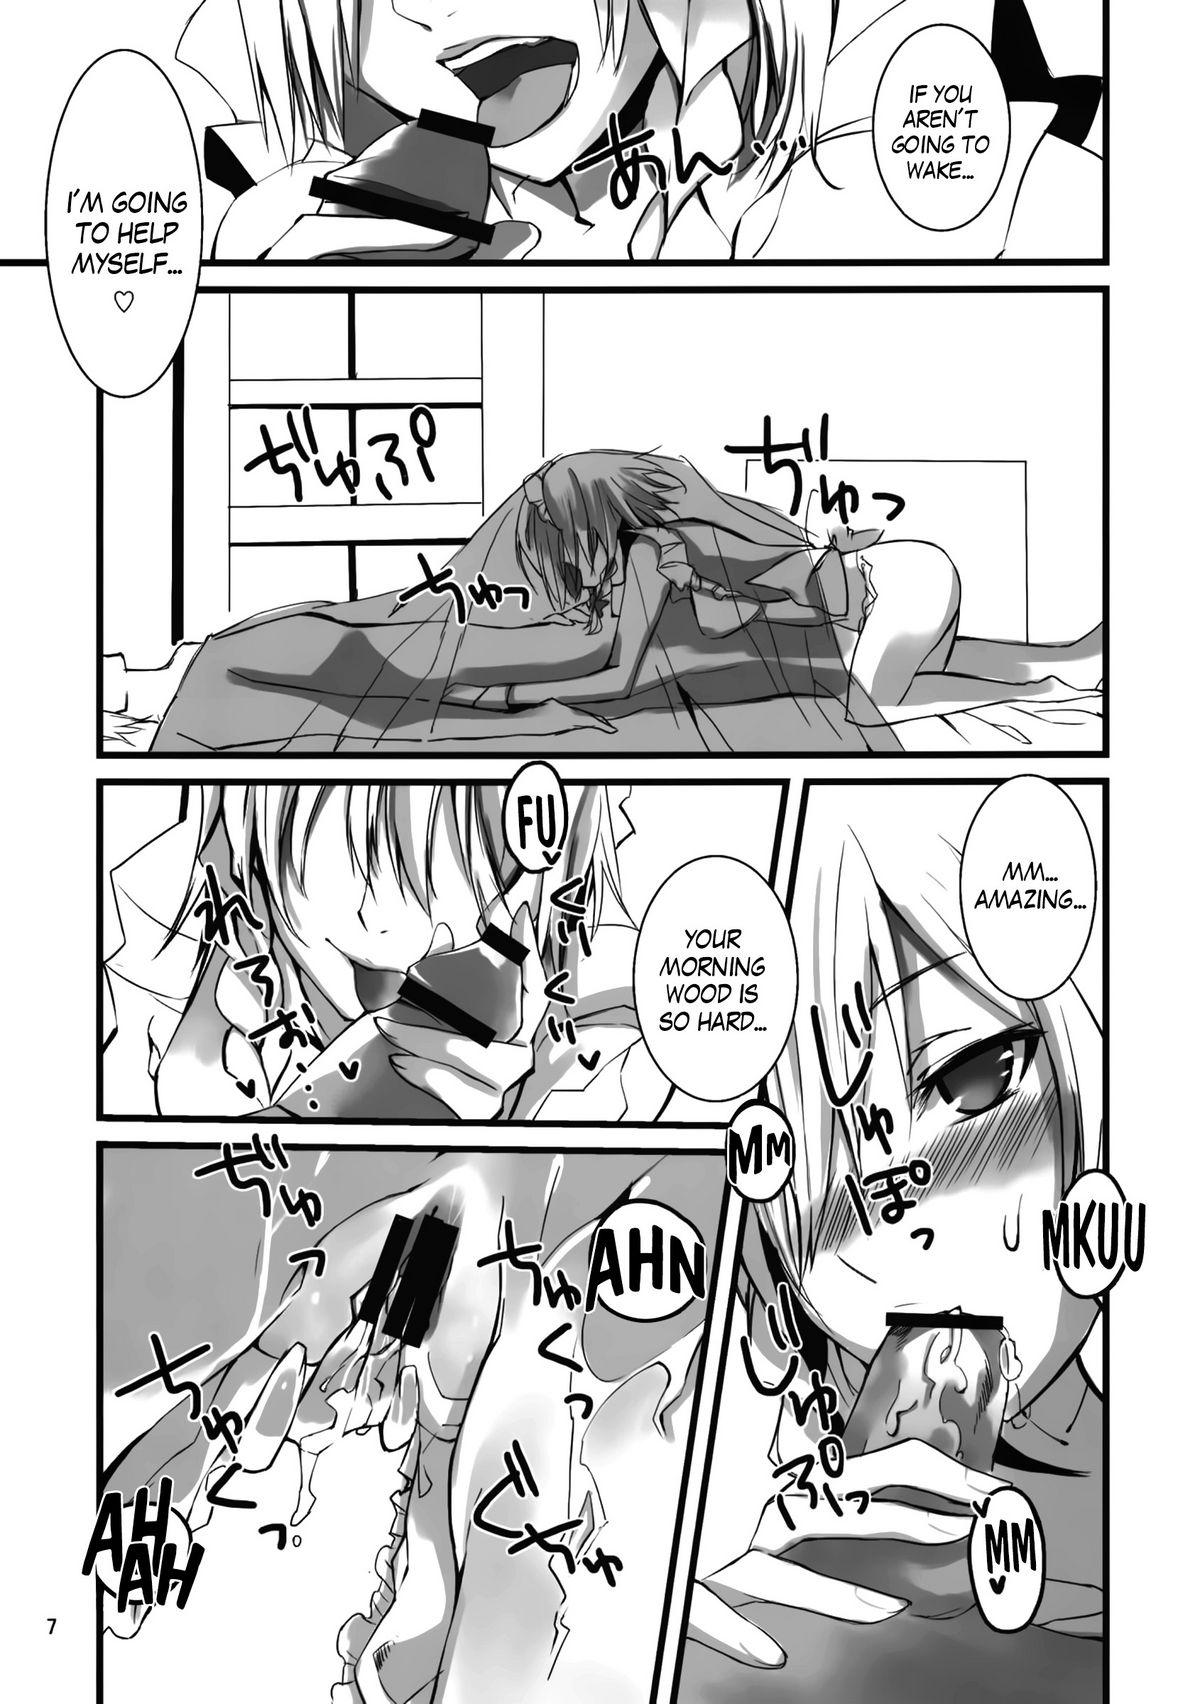 Lez 1 day my maid - Touhou project Pendeja - Page 7